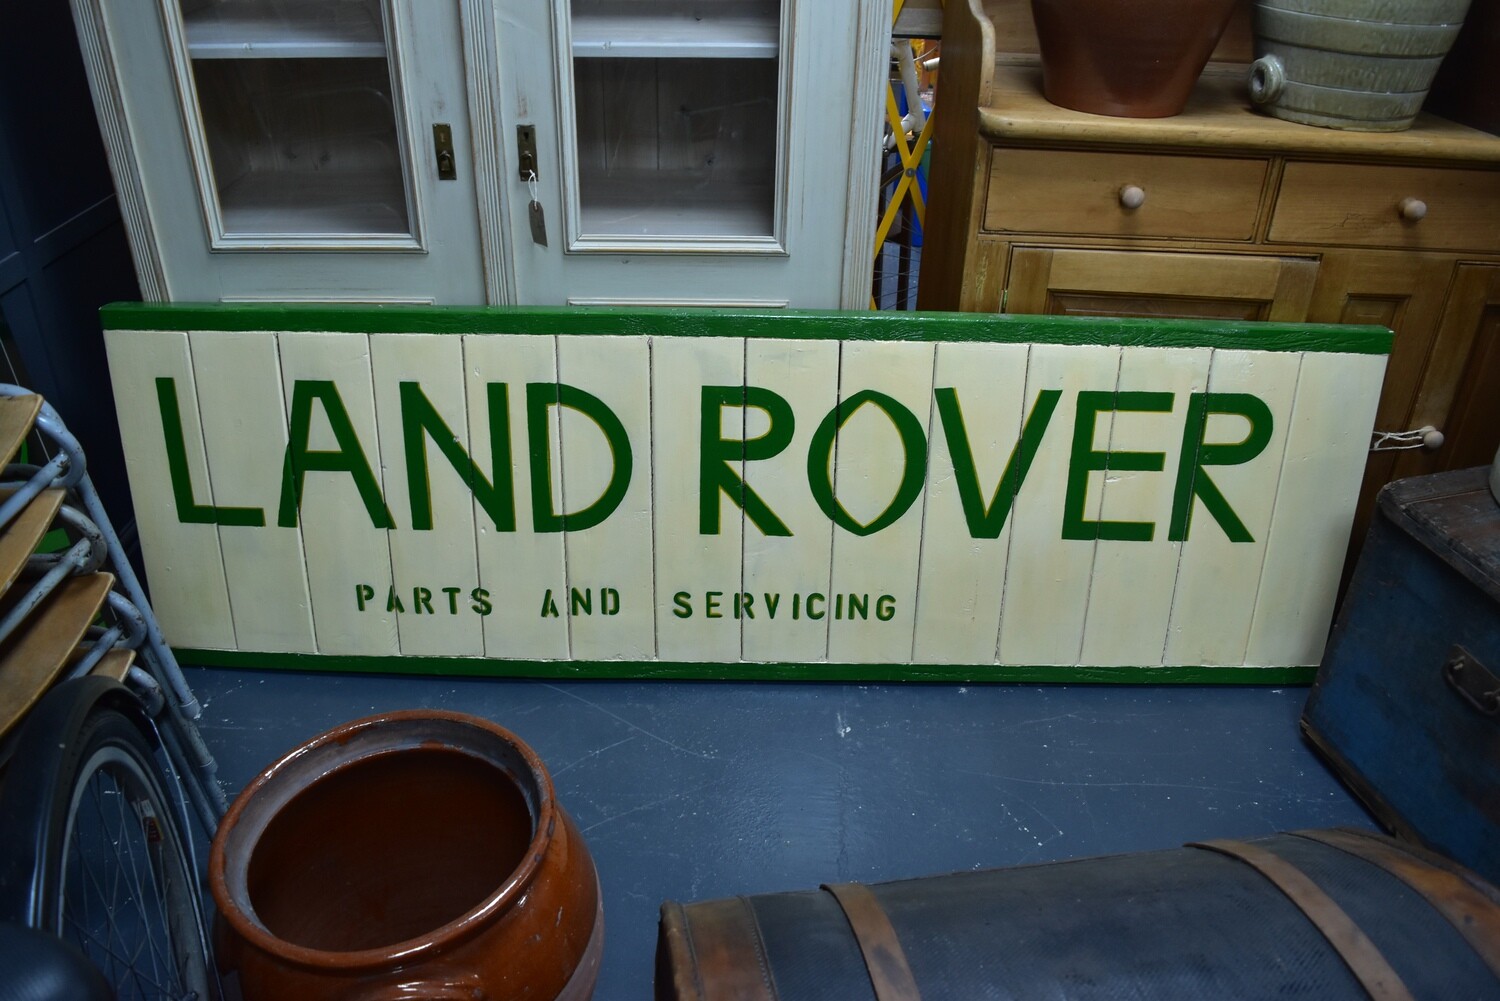 Land Rover - Parts and Servicing Advertising Sign